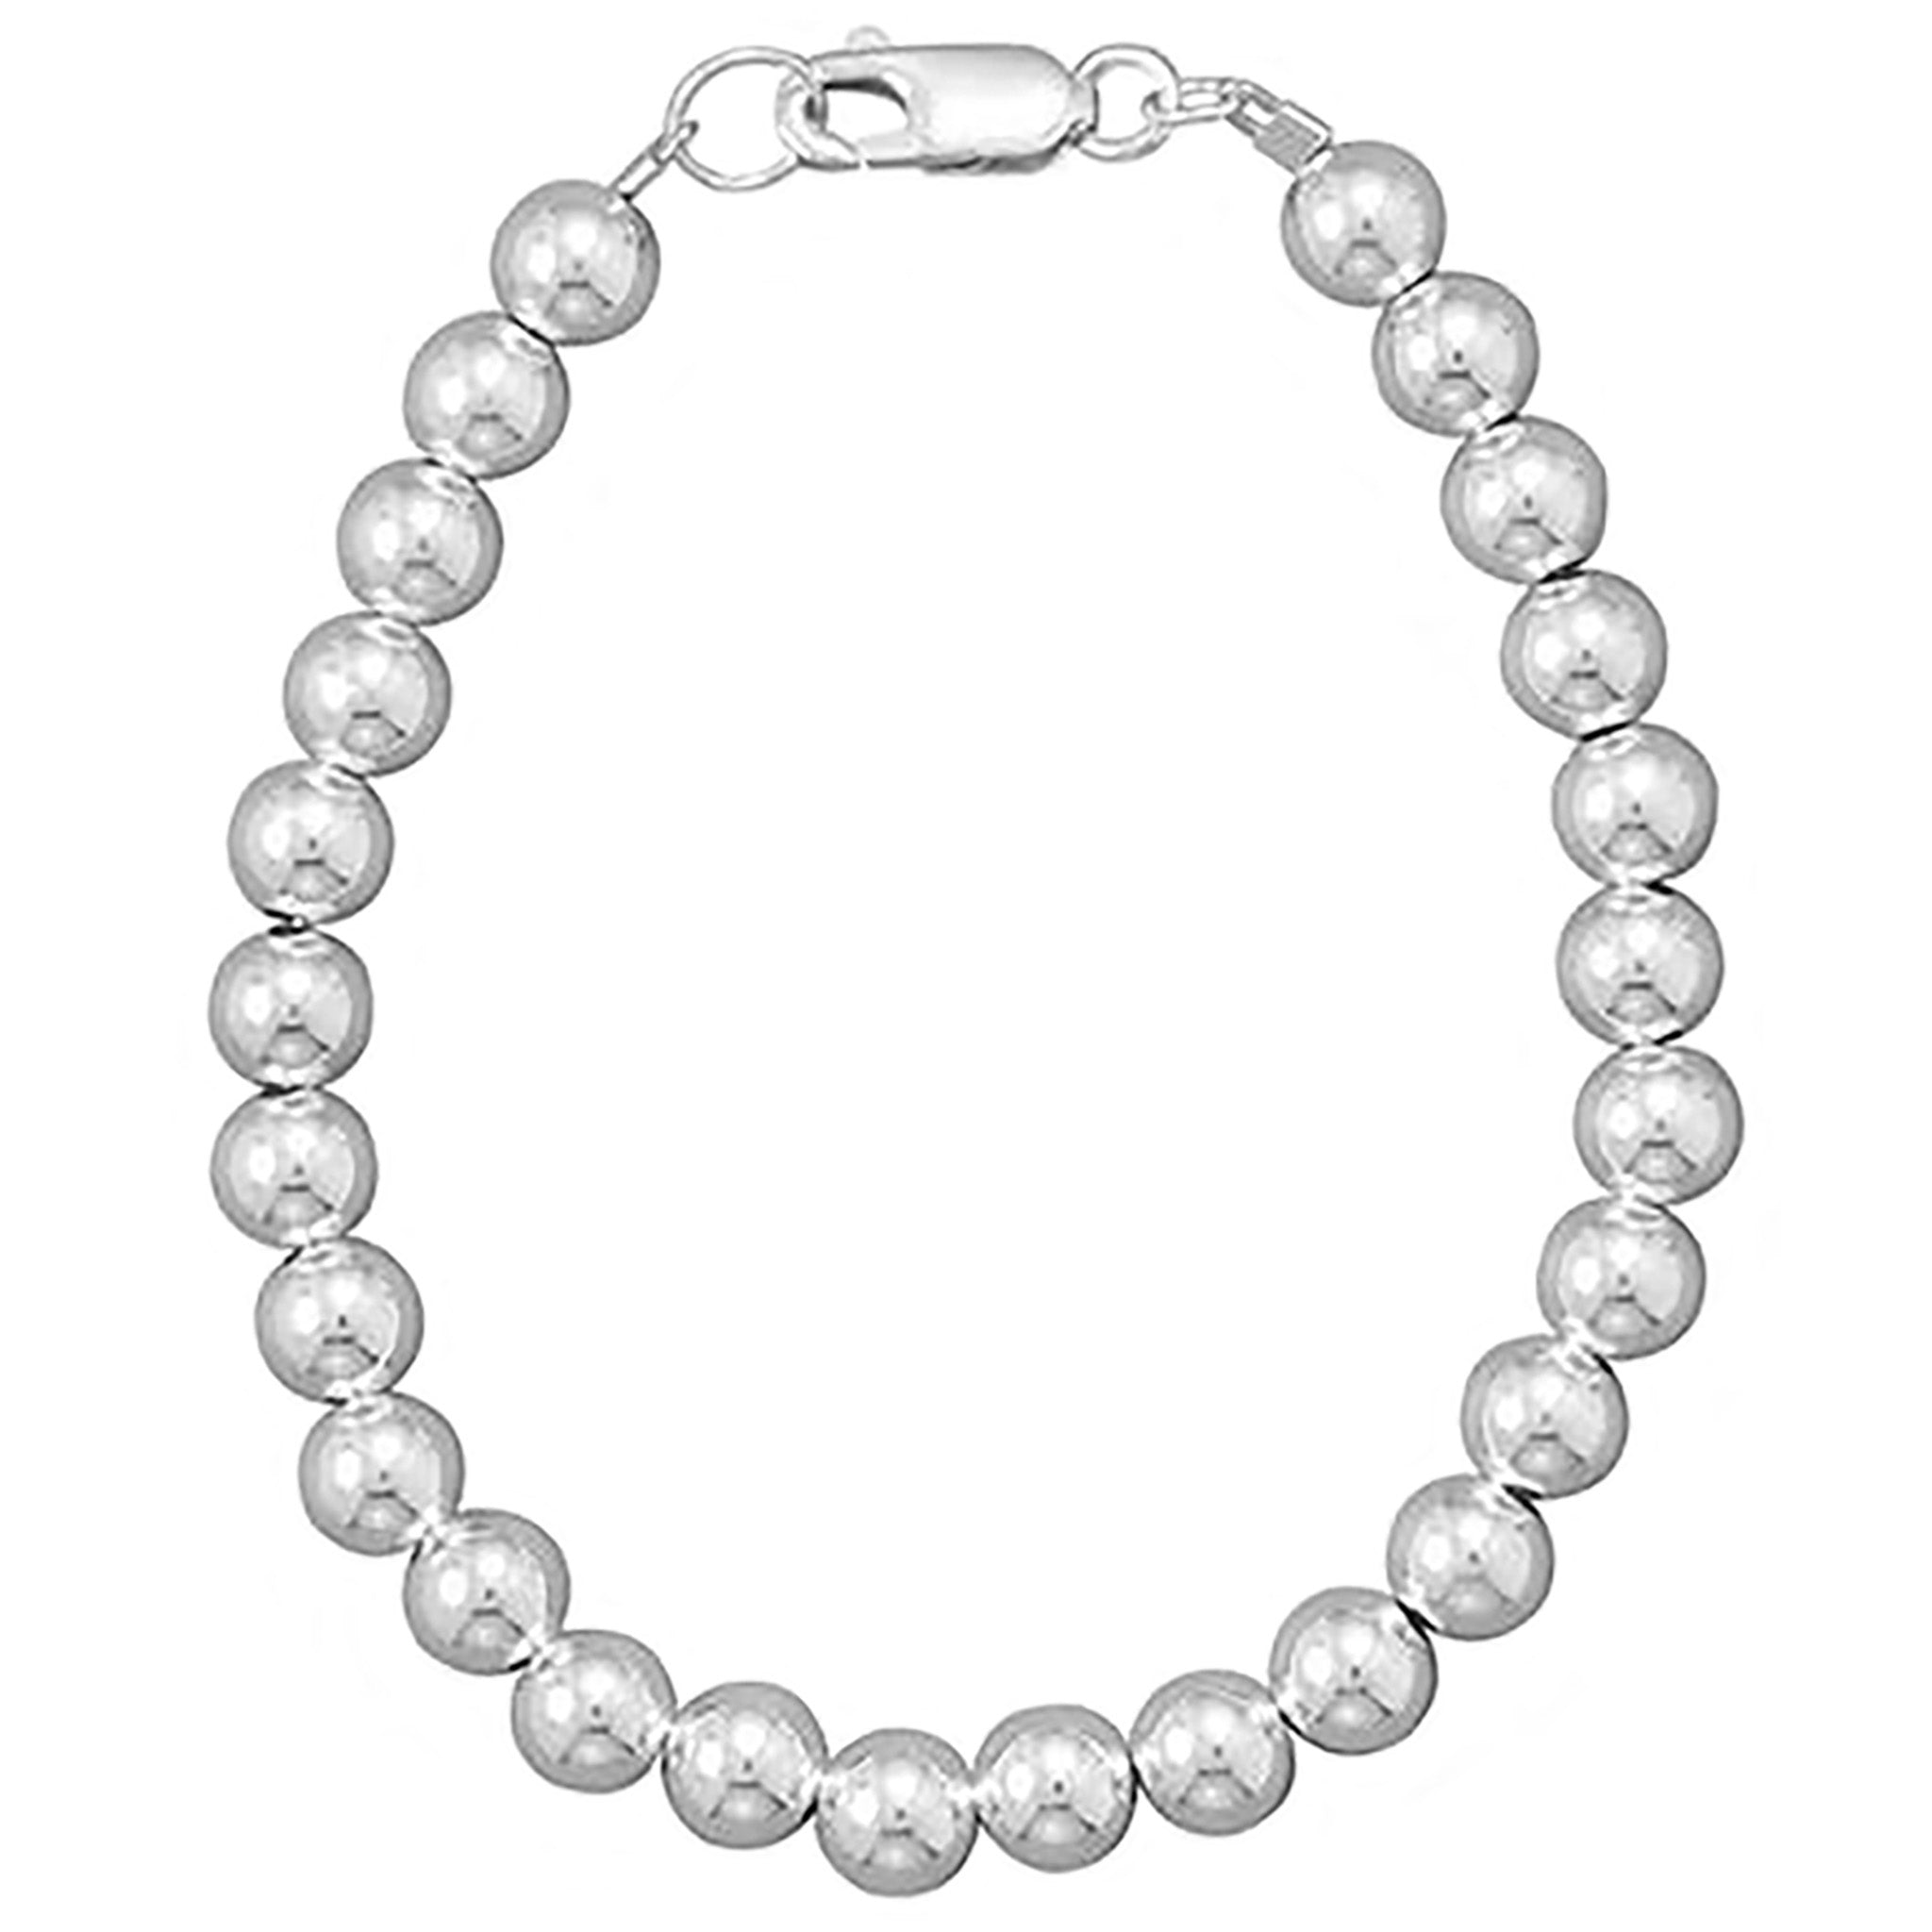 6mm Silver Bead Strand Necklace